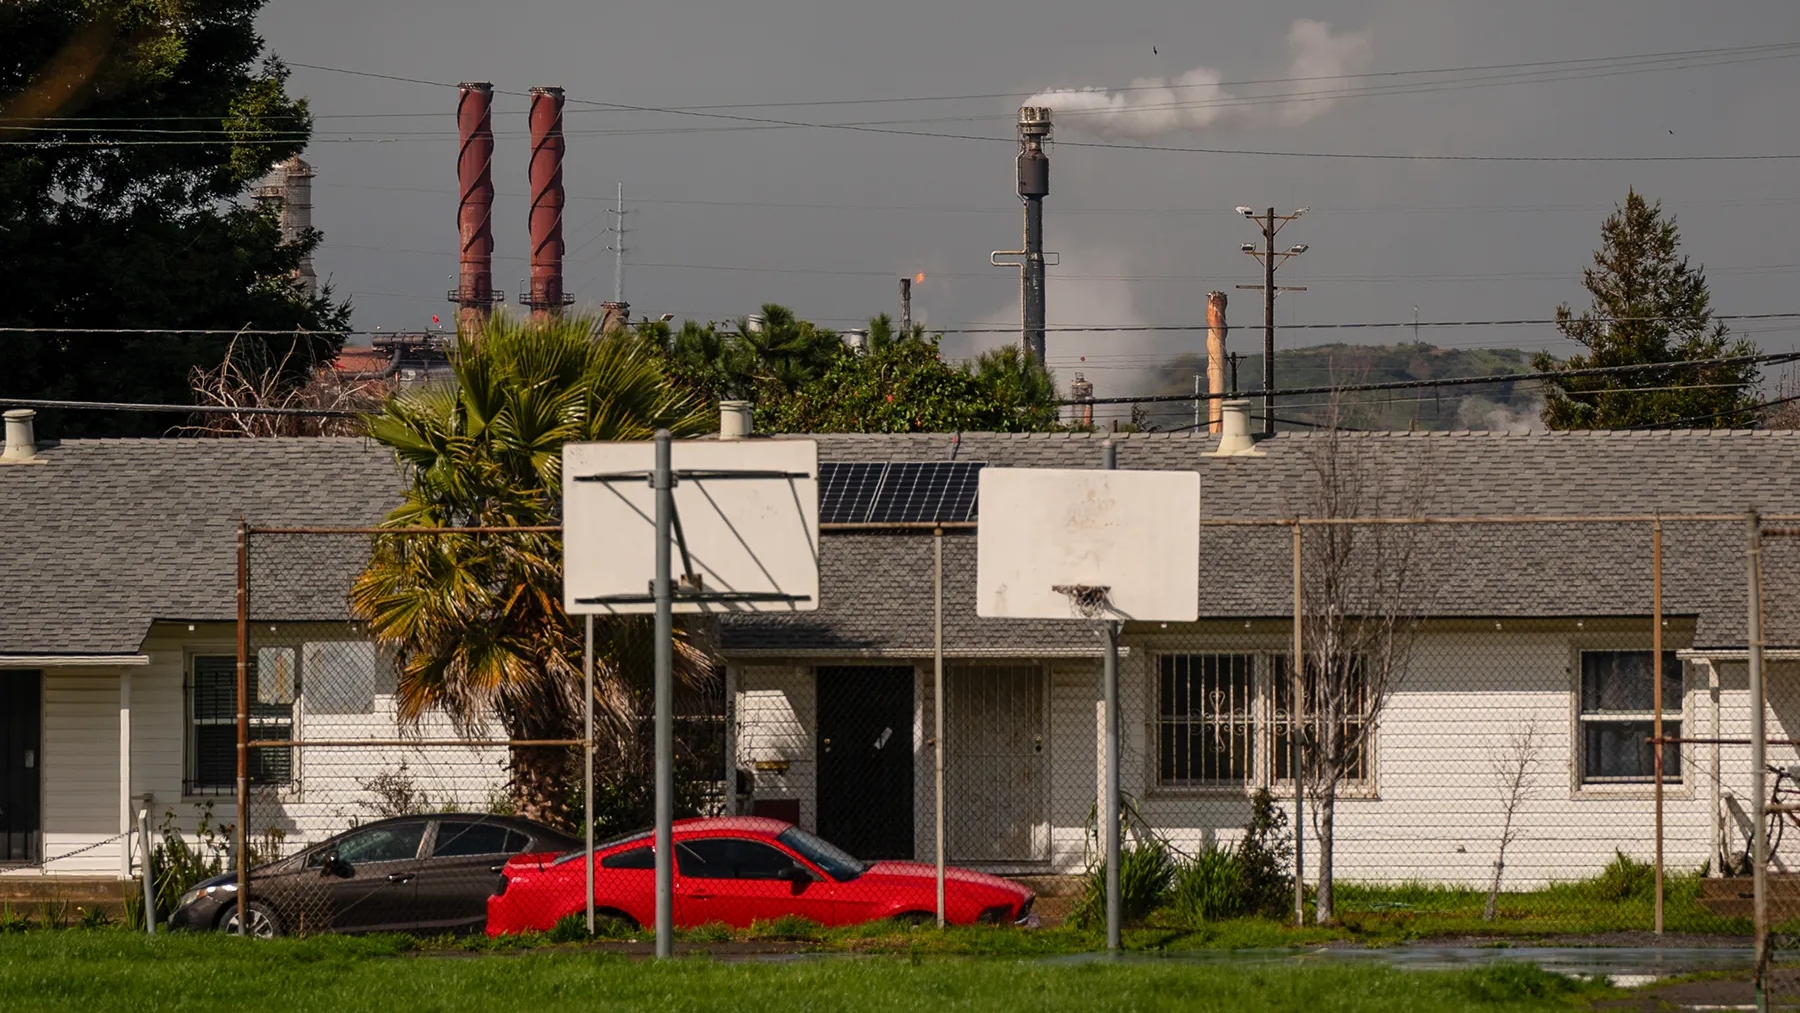 A small white house with a gray roof and solar panels sits in front of an industrial area with smokestacks. A red Mustang sits out front next to grass and basketball hoops.